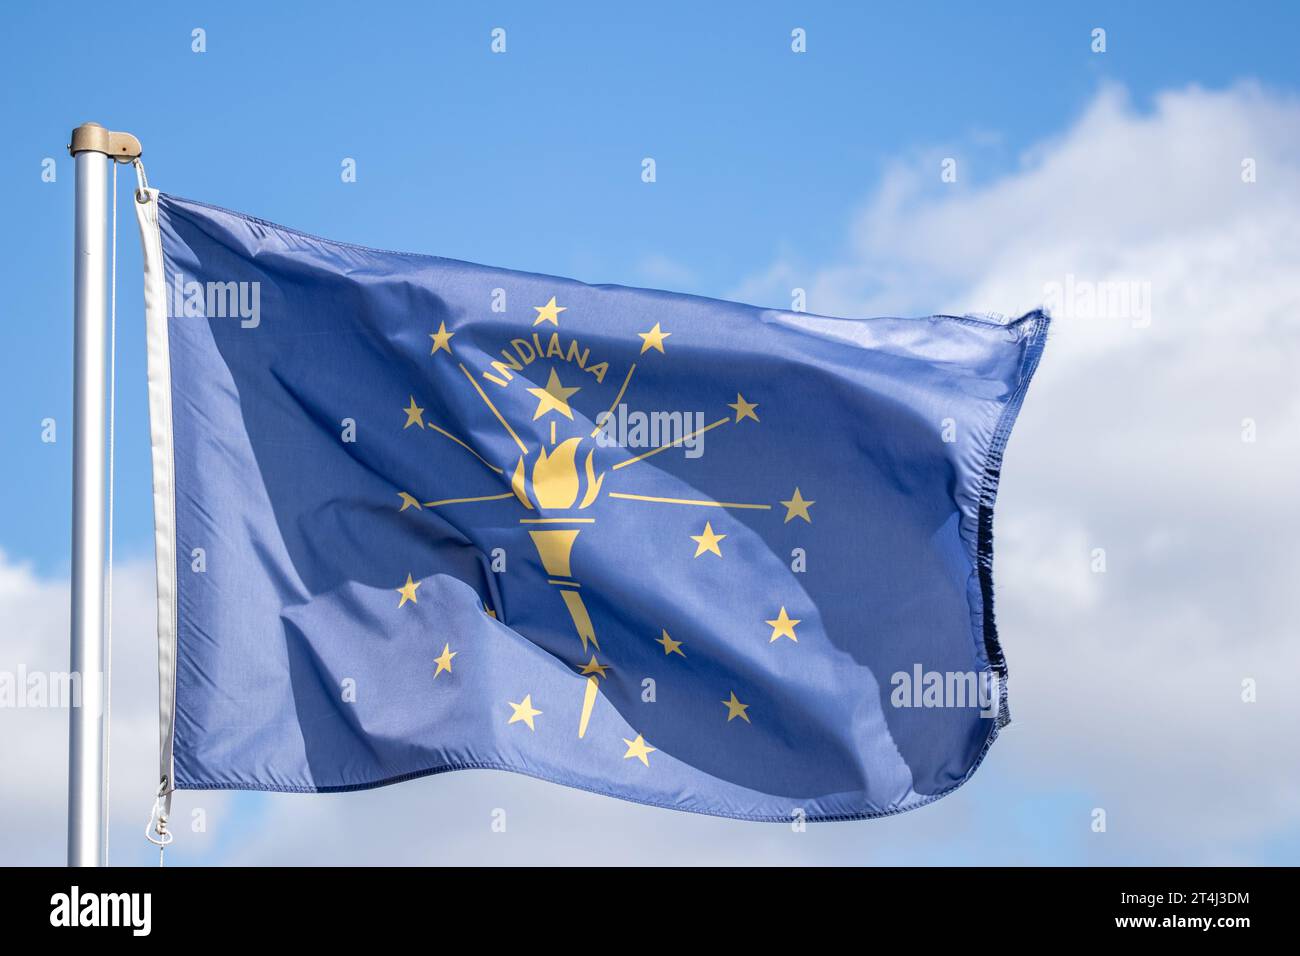 Indiana state flag flying in the wind against blue sky Stock Photo